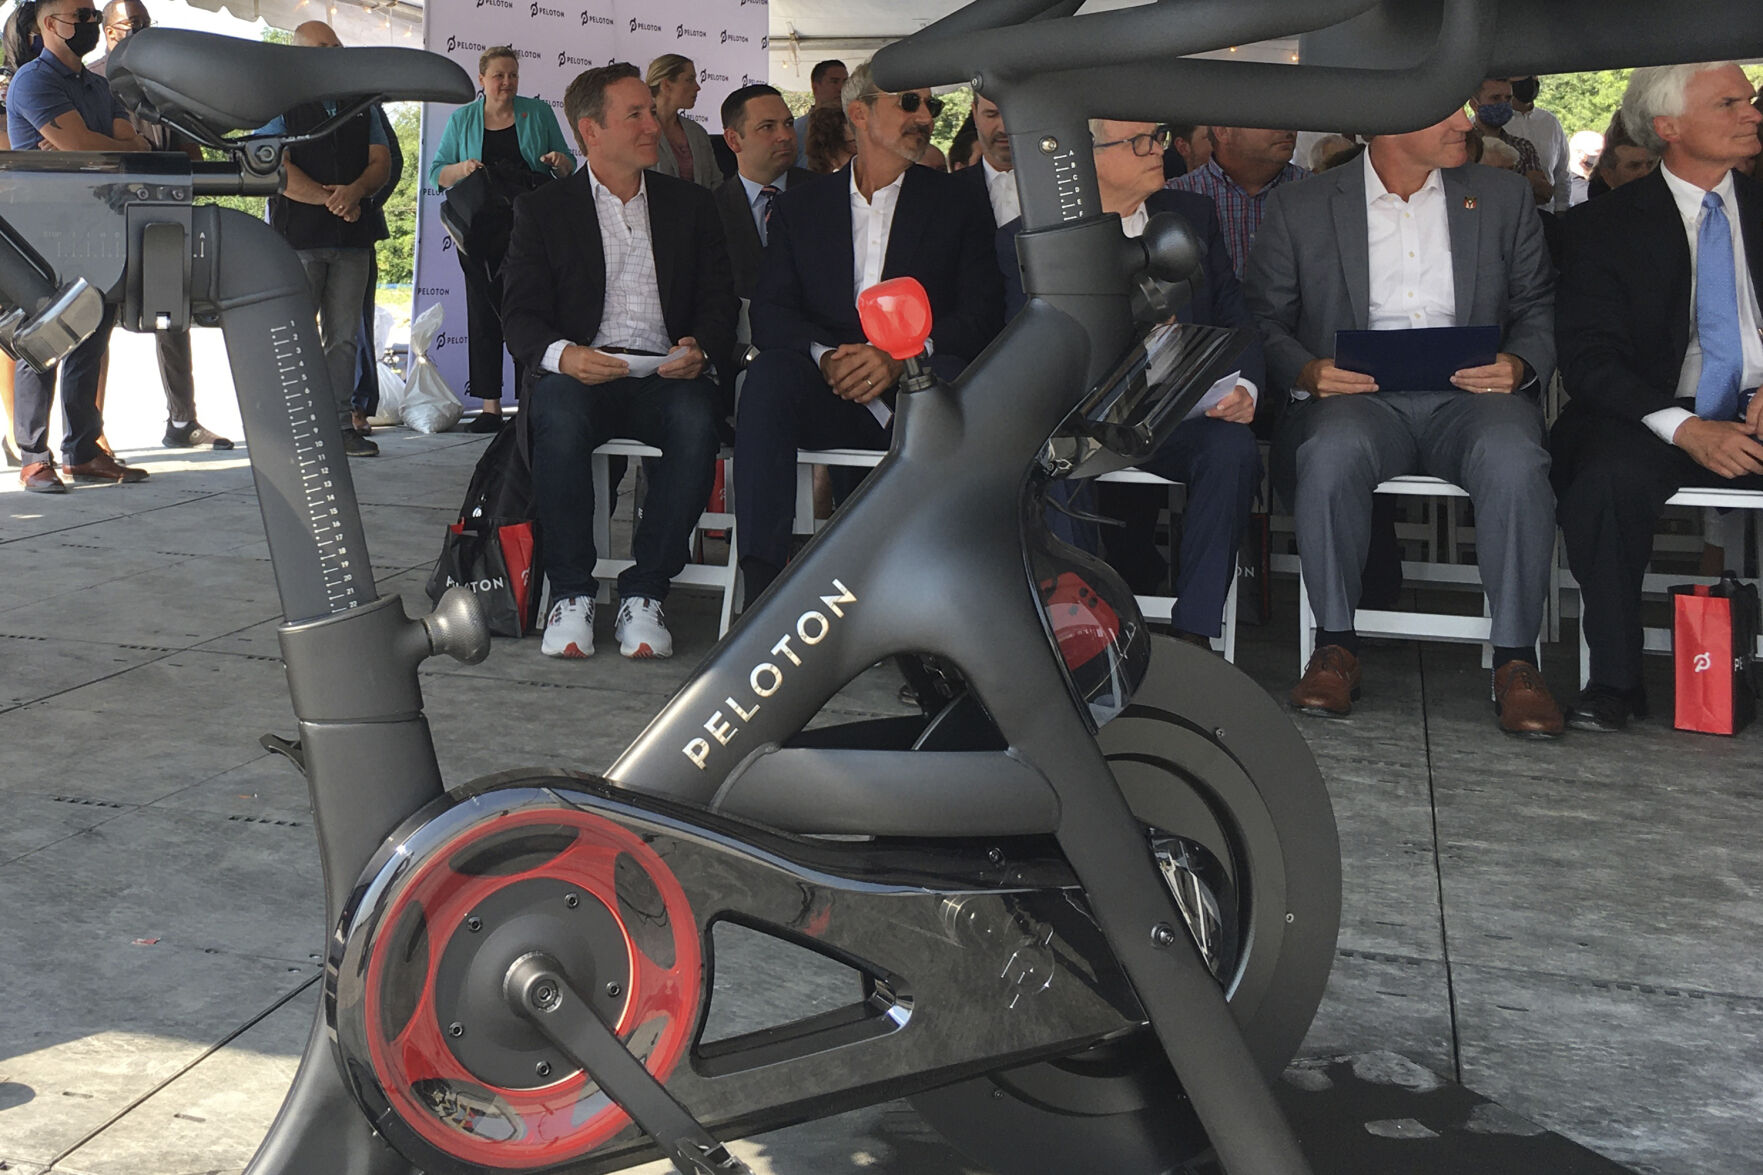 Peloton CEO John Foley (left) is seen behind one of his company